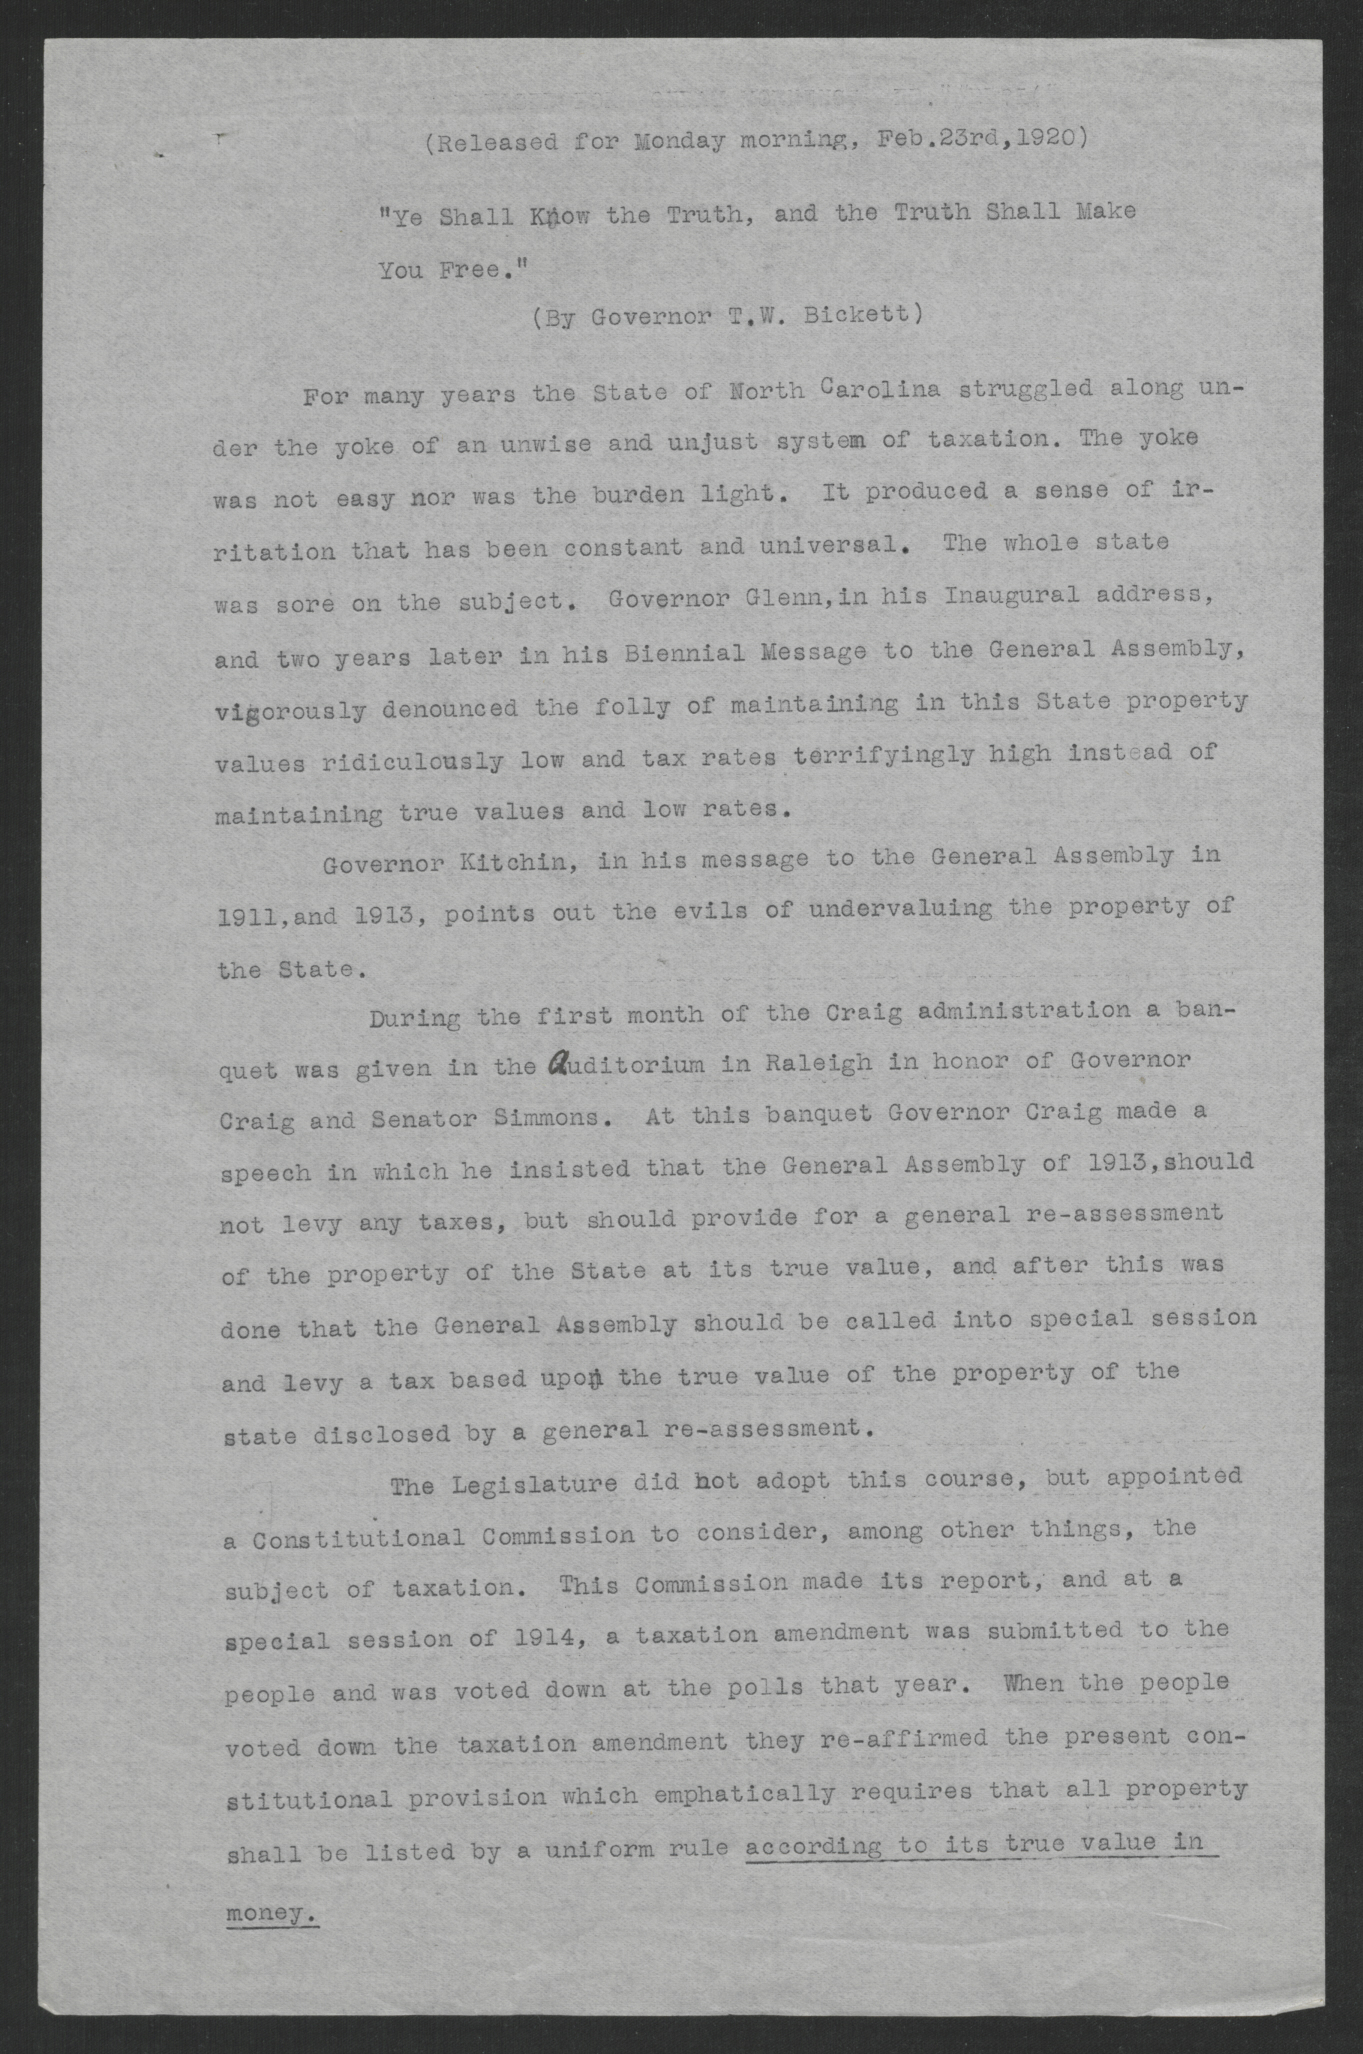 Press Statement by Thomas W. Bickett on the Revaluation Act, February 23, 1920, page 1